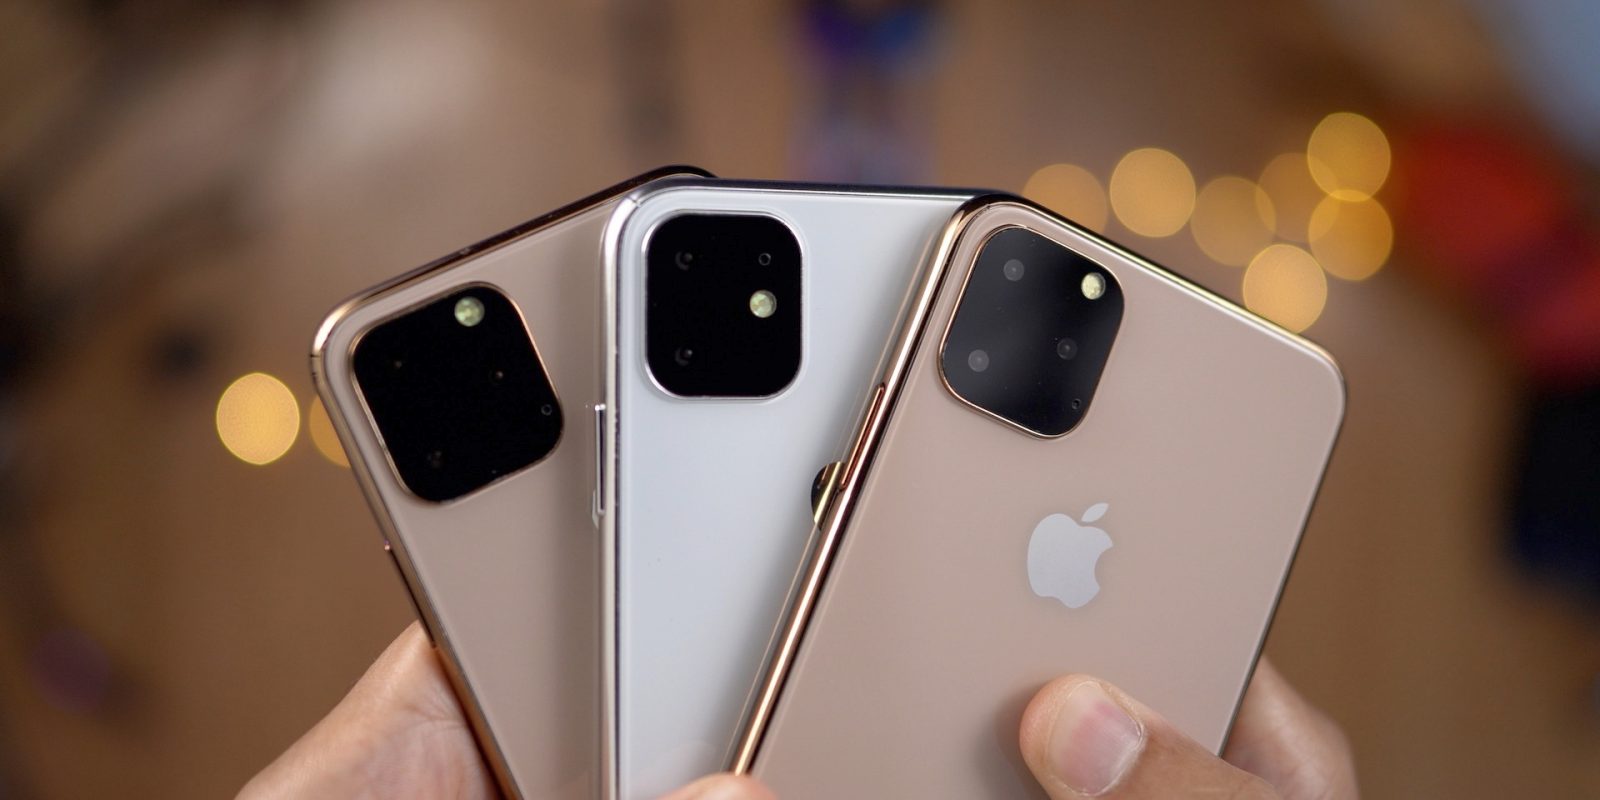 The New iPhones Will Have 5G